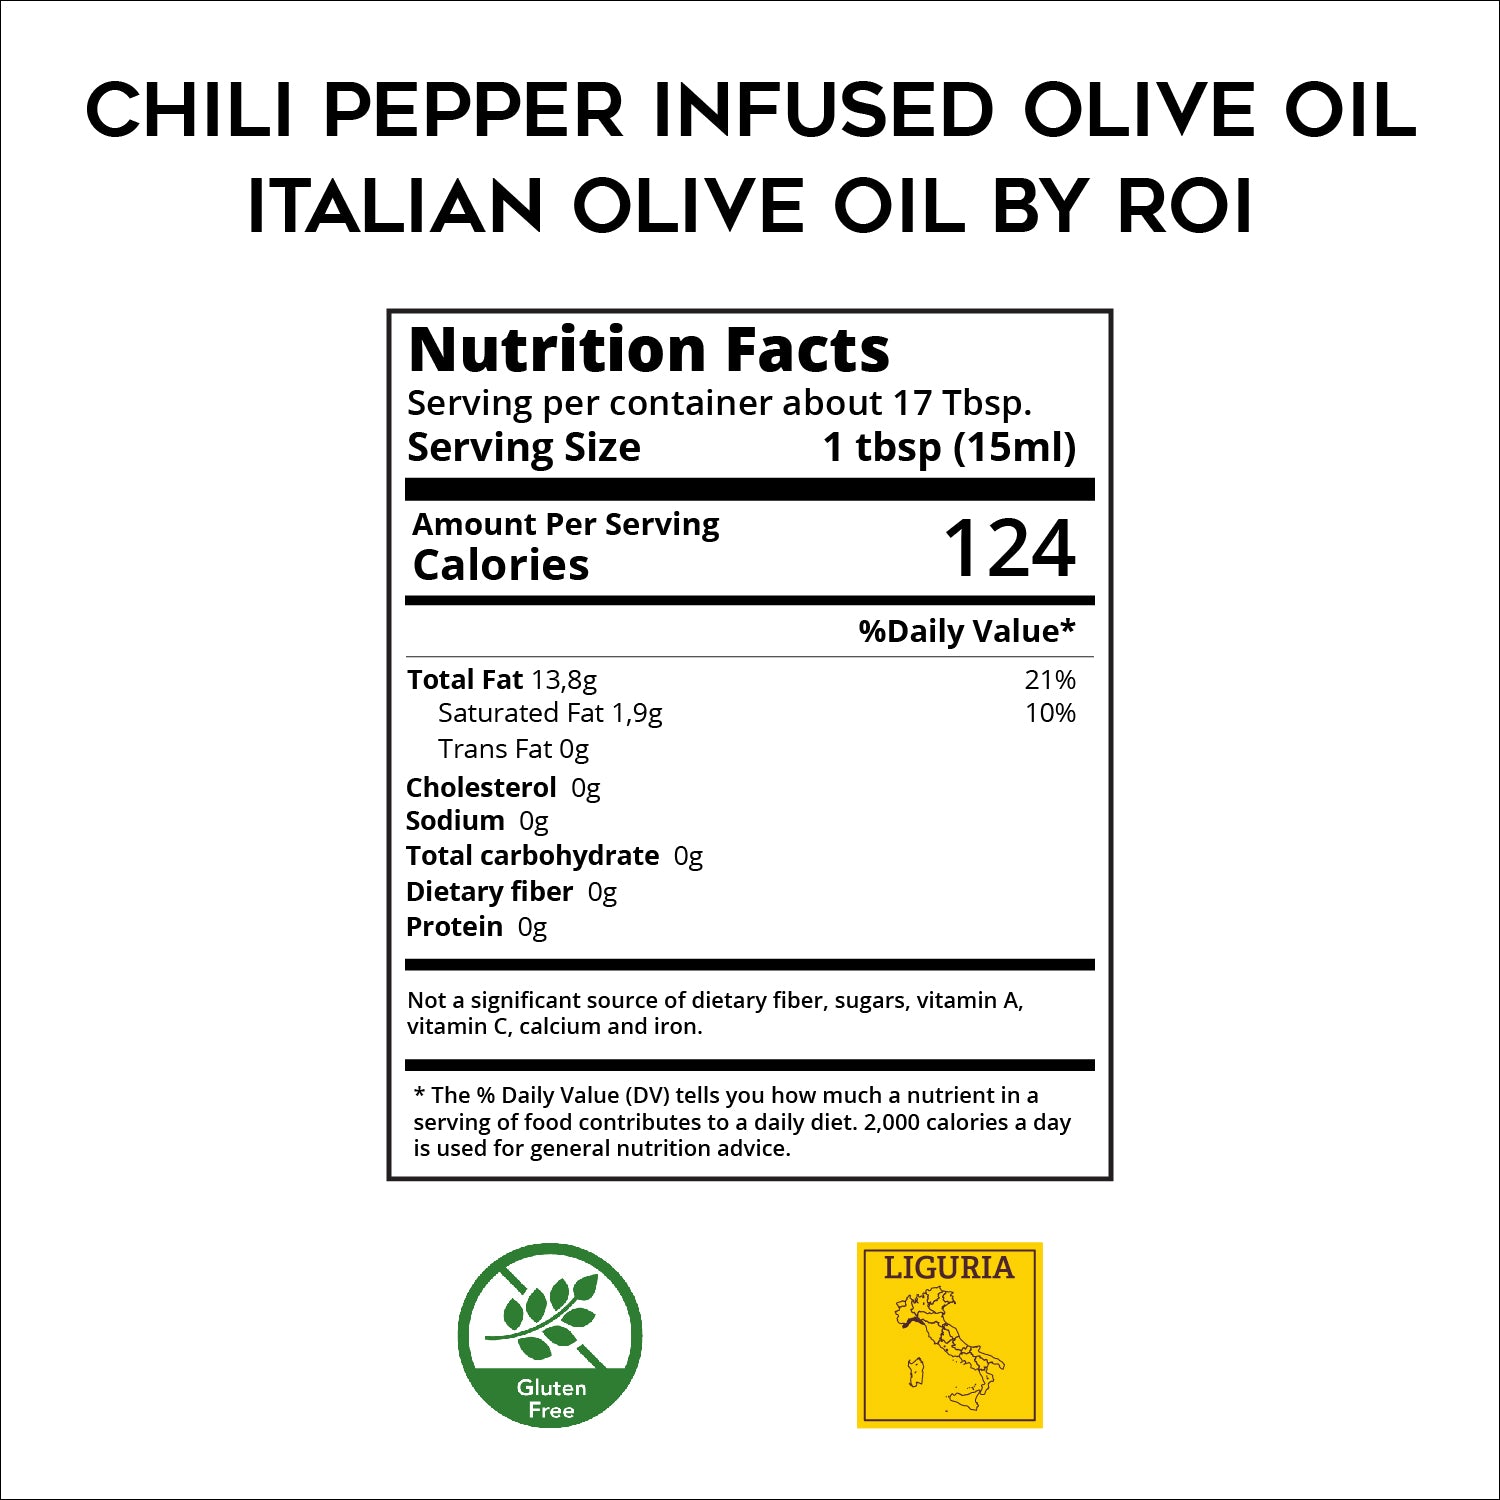 Chili Pepper Infused Olive Oil - Italian Olive Oil by ROI